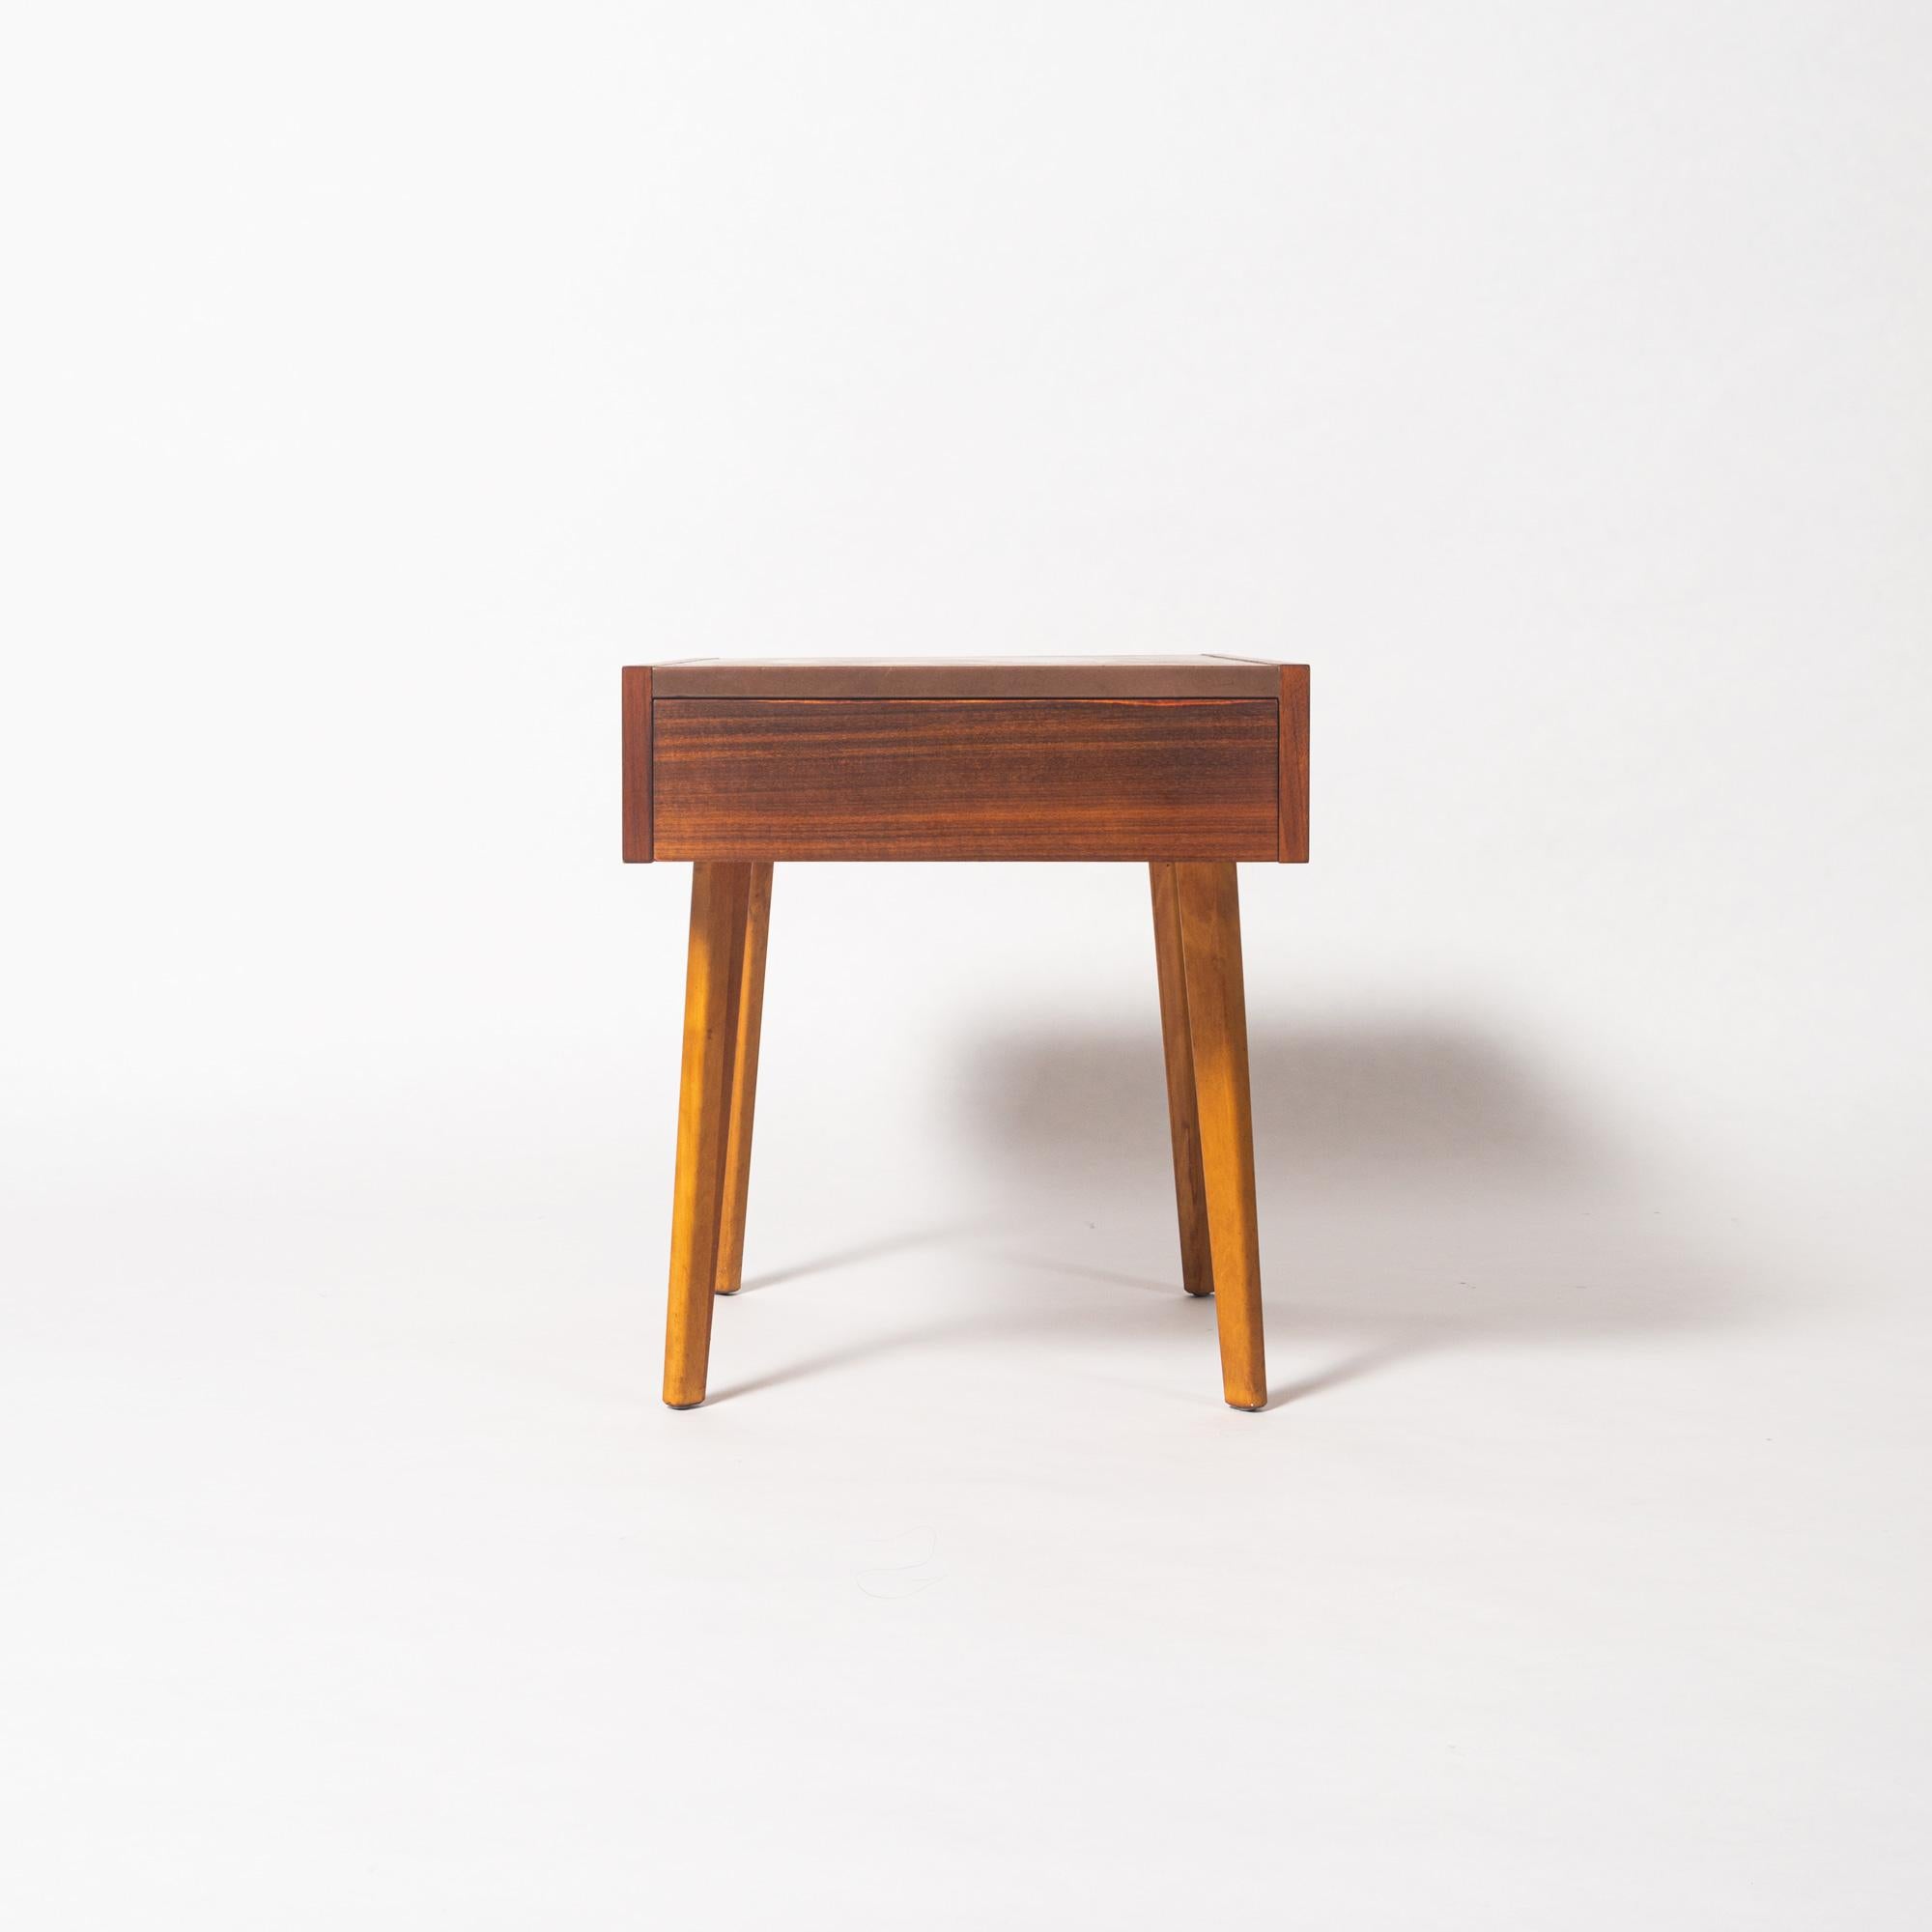 A pair of small end tables with drawer by George Nelson for Herman Miller. The table is made of a teak frame with tapered legs and a brown leather top. circa 1950s. This item will be delivered by one of our trusted furniture delivery company, and